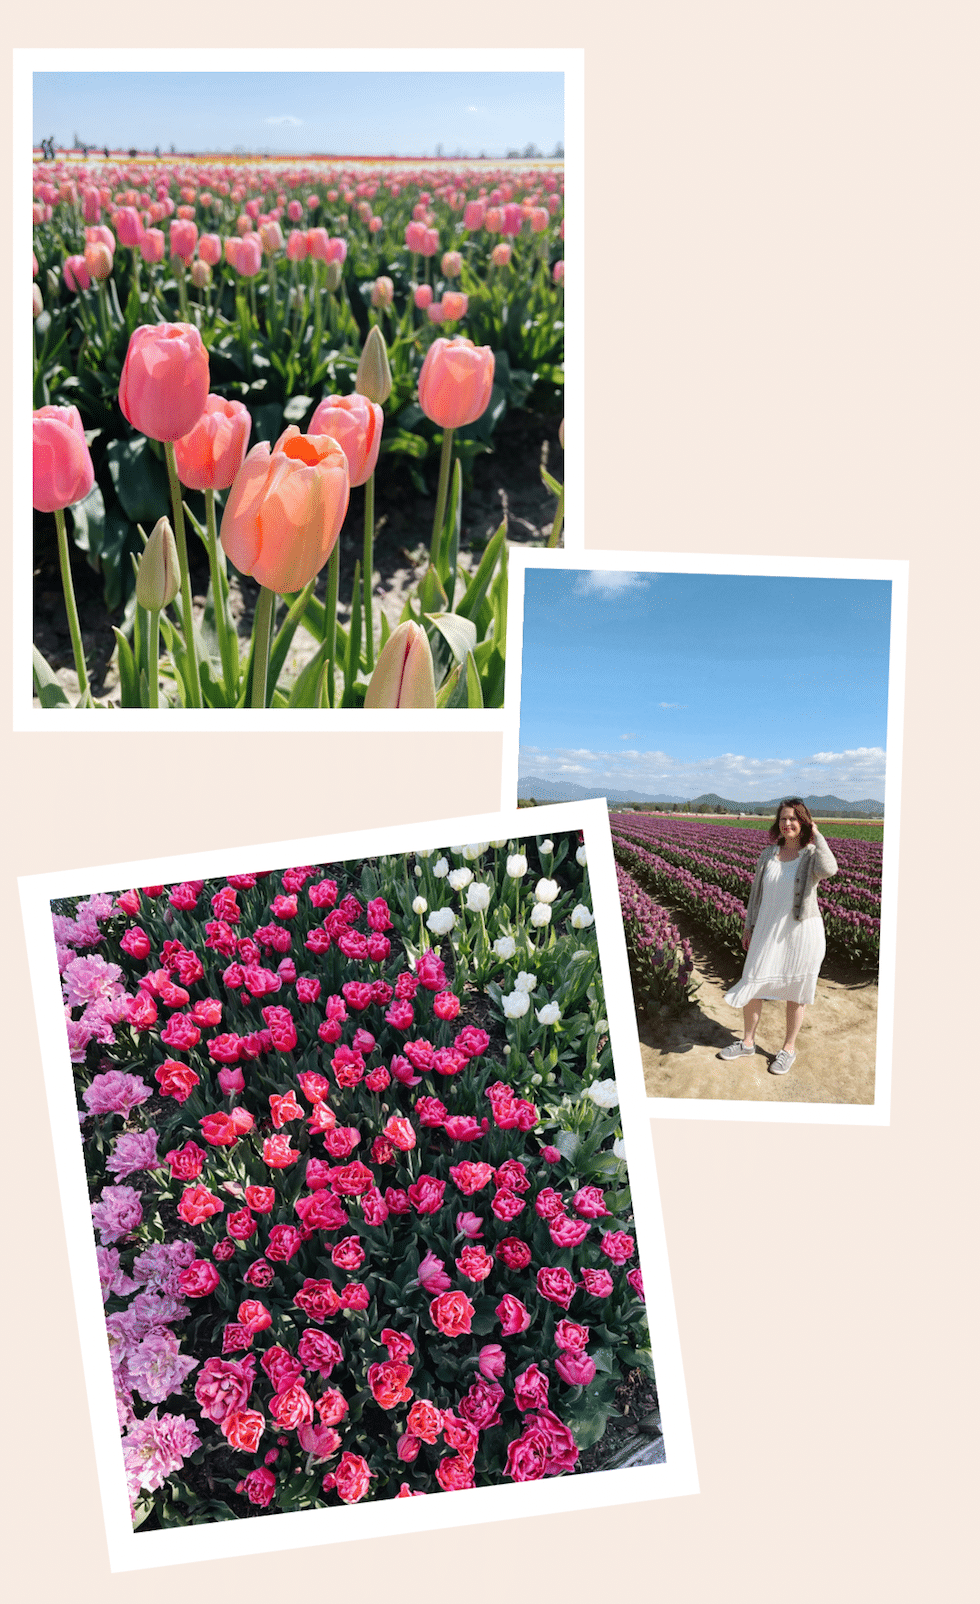 Out to See: Tulip Festival Roozengaarde (Washington State)